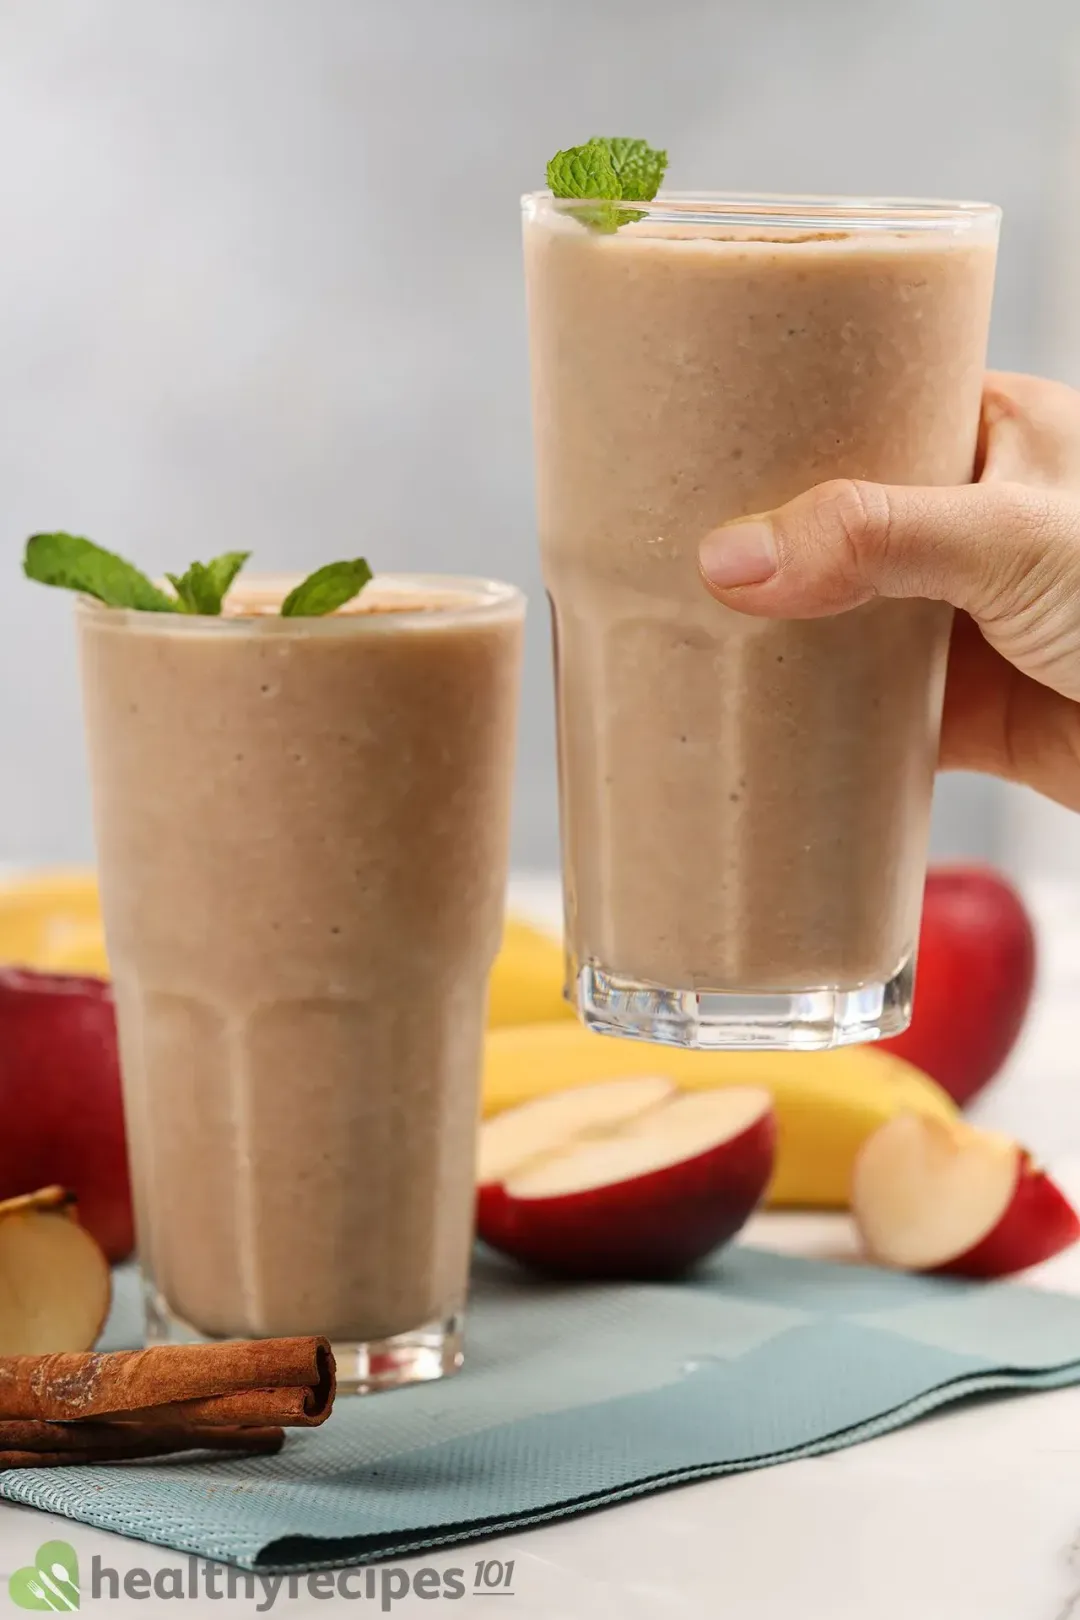 How Long Does Apple Banana Smoothie Last